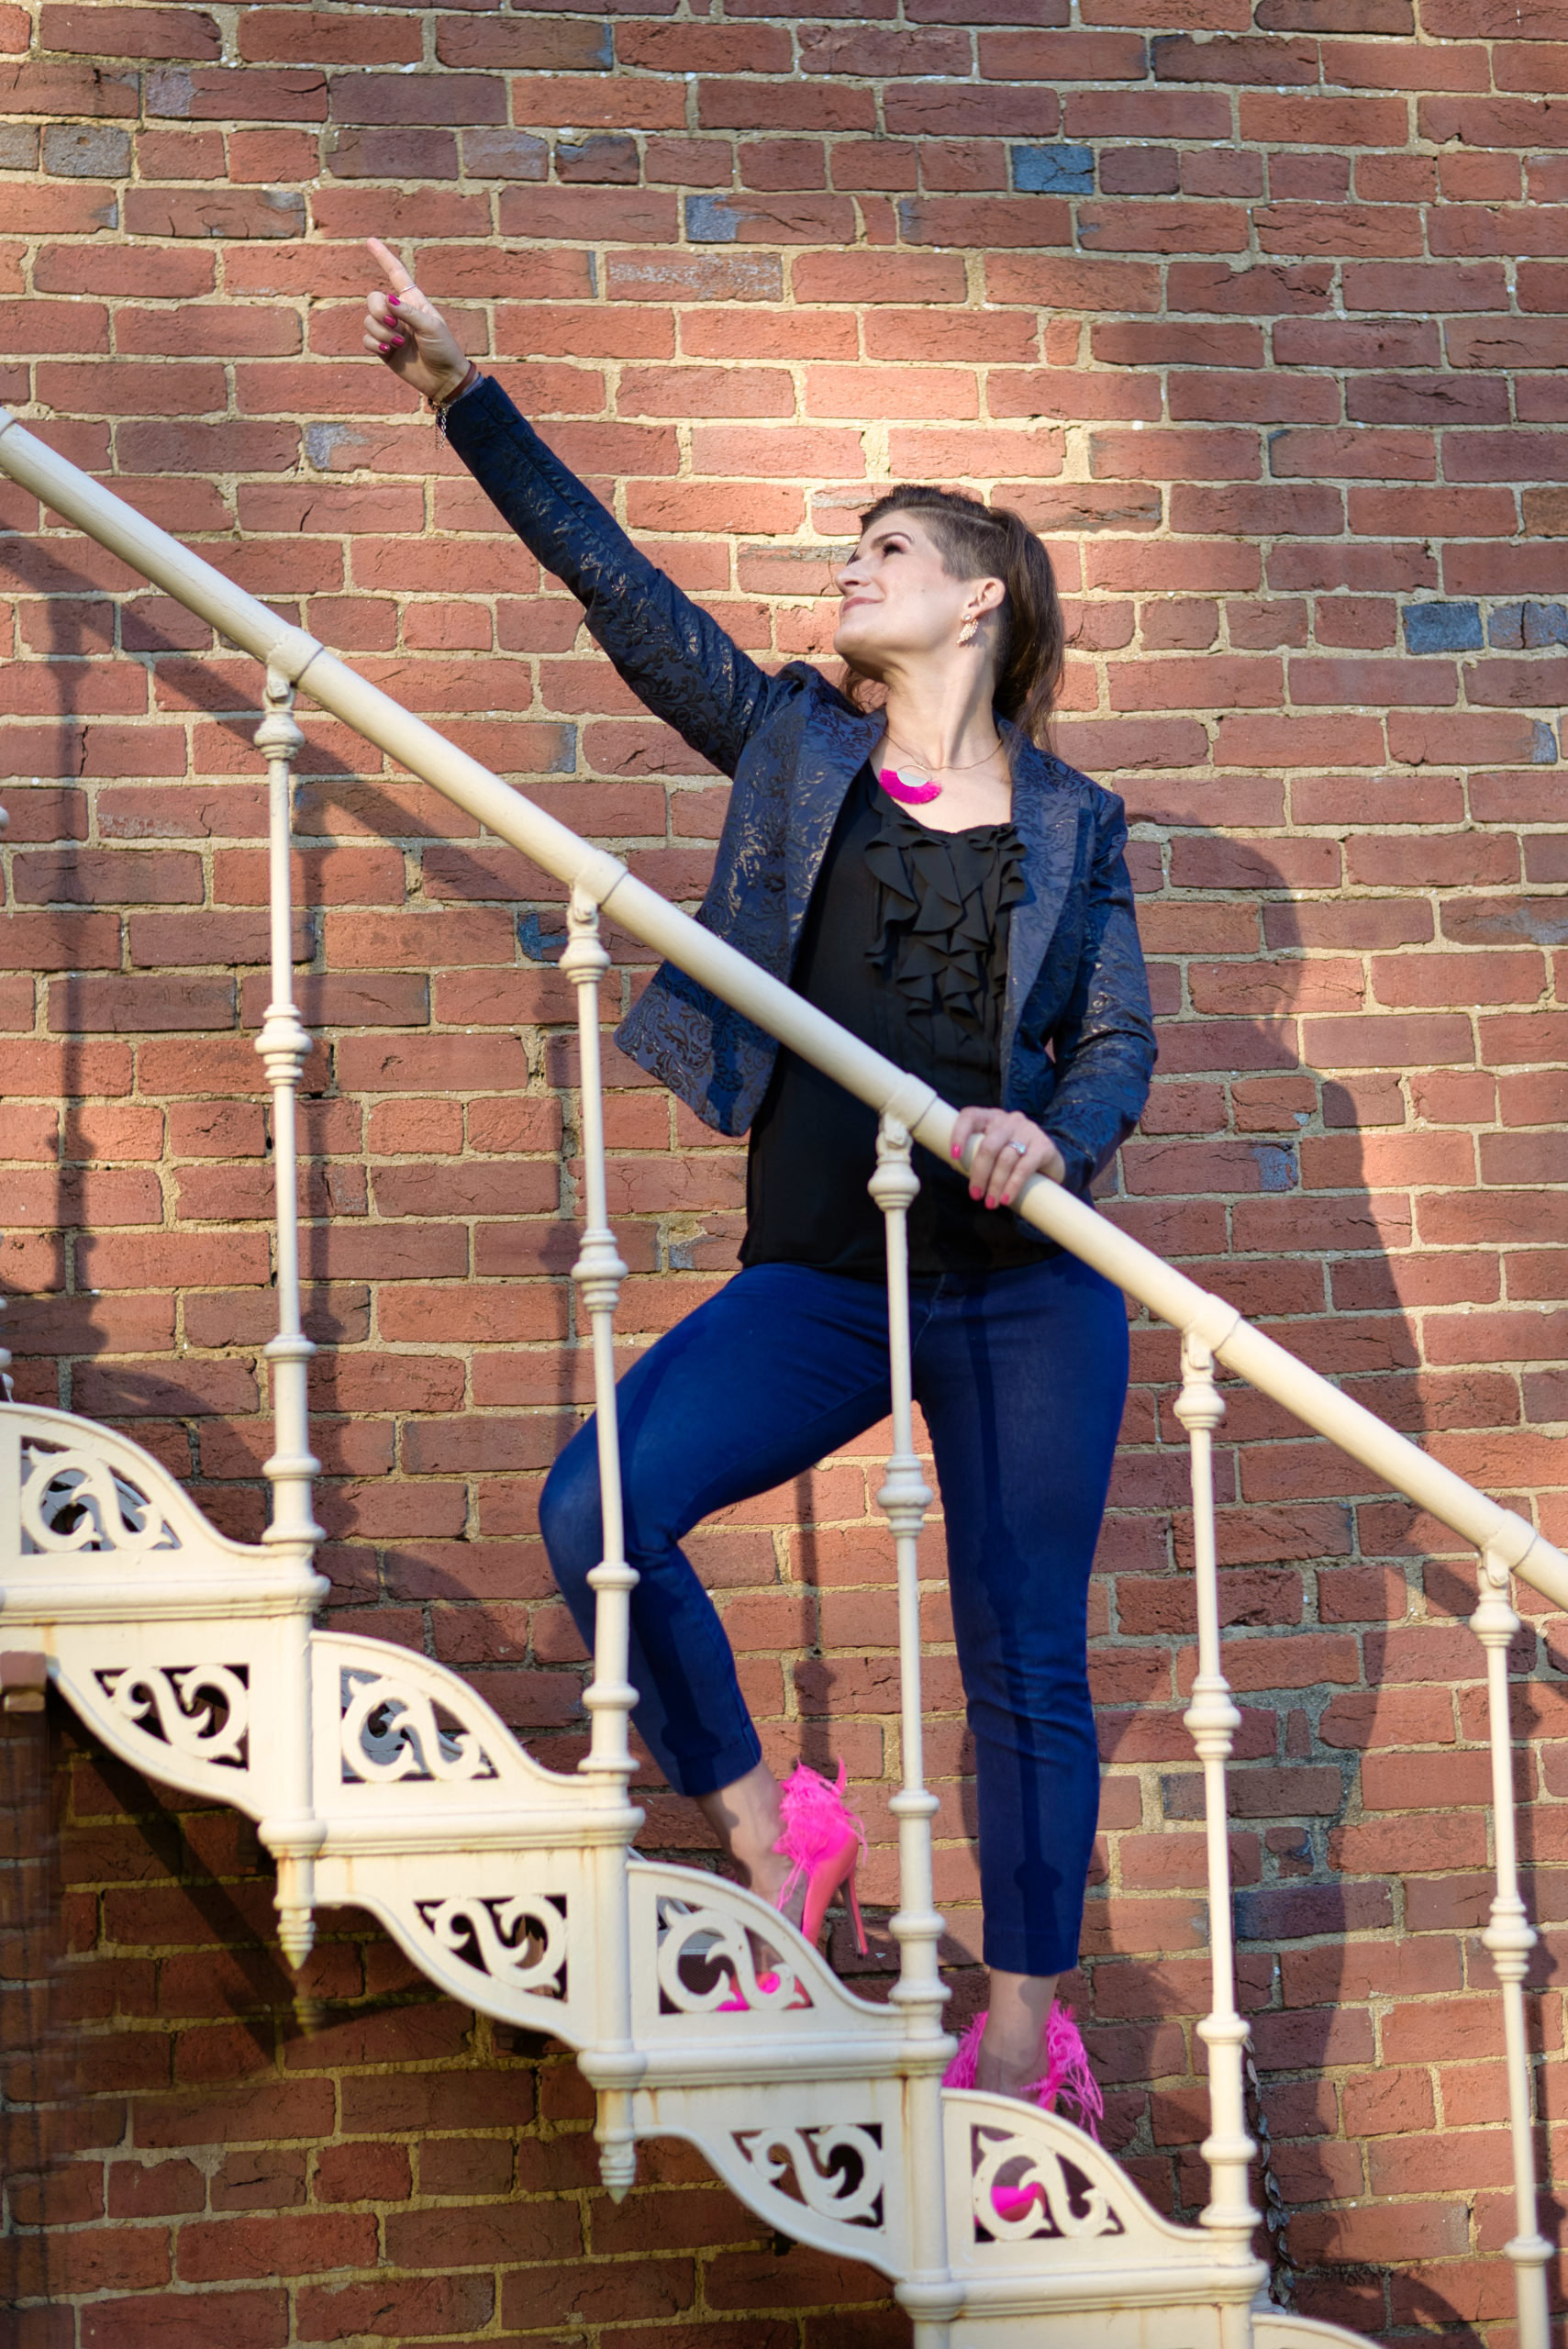 Dr. Andrea Moore wears bright pink high heels and jeans and lays in front of a gray brick wall in a photo promoting her Pain to Power Group for Chronic Pain.